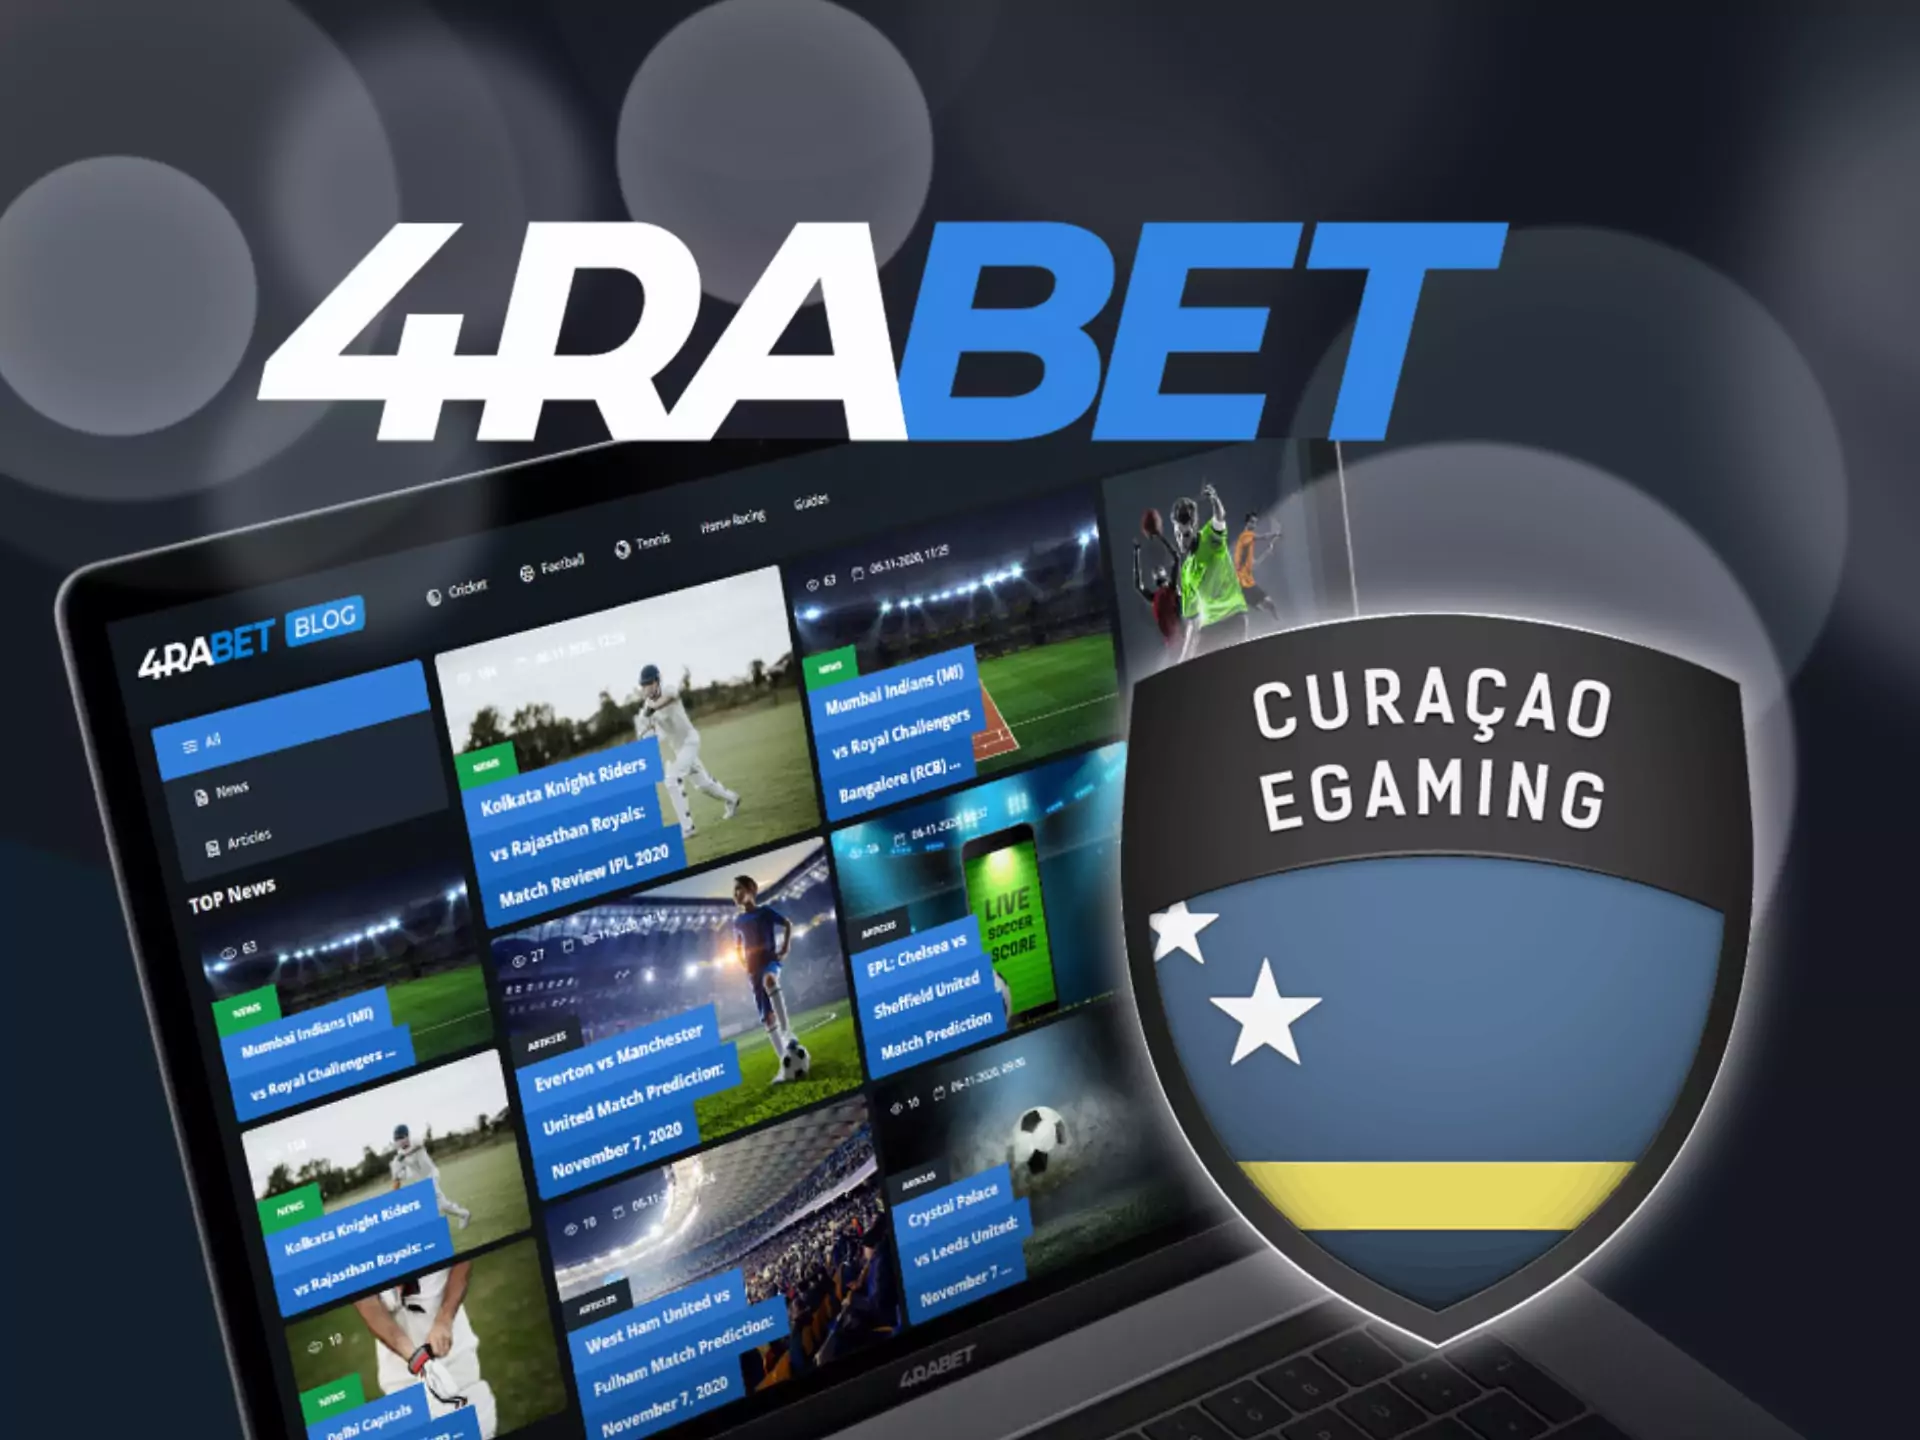 4rabet is properly licensed and is safe for betting.